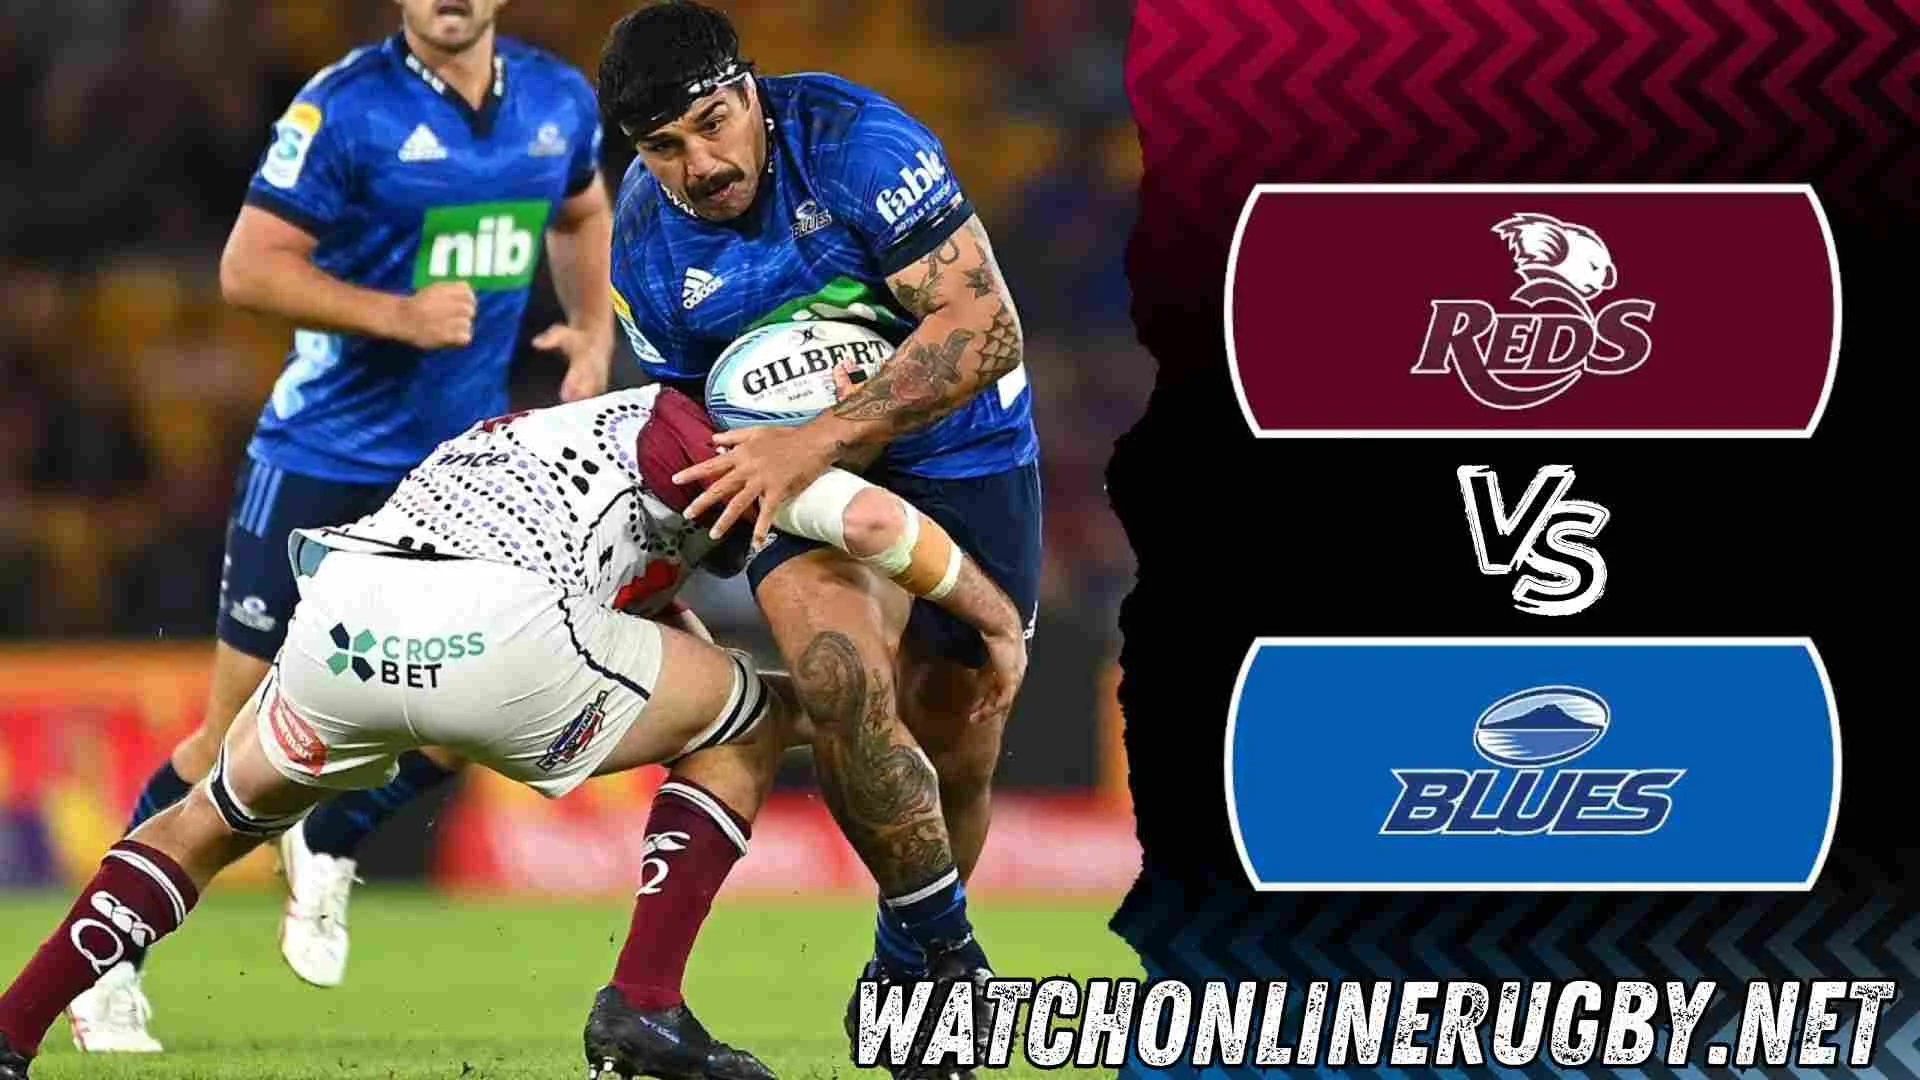 Watch Reds Vs Blues Rugby Live